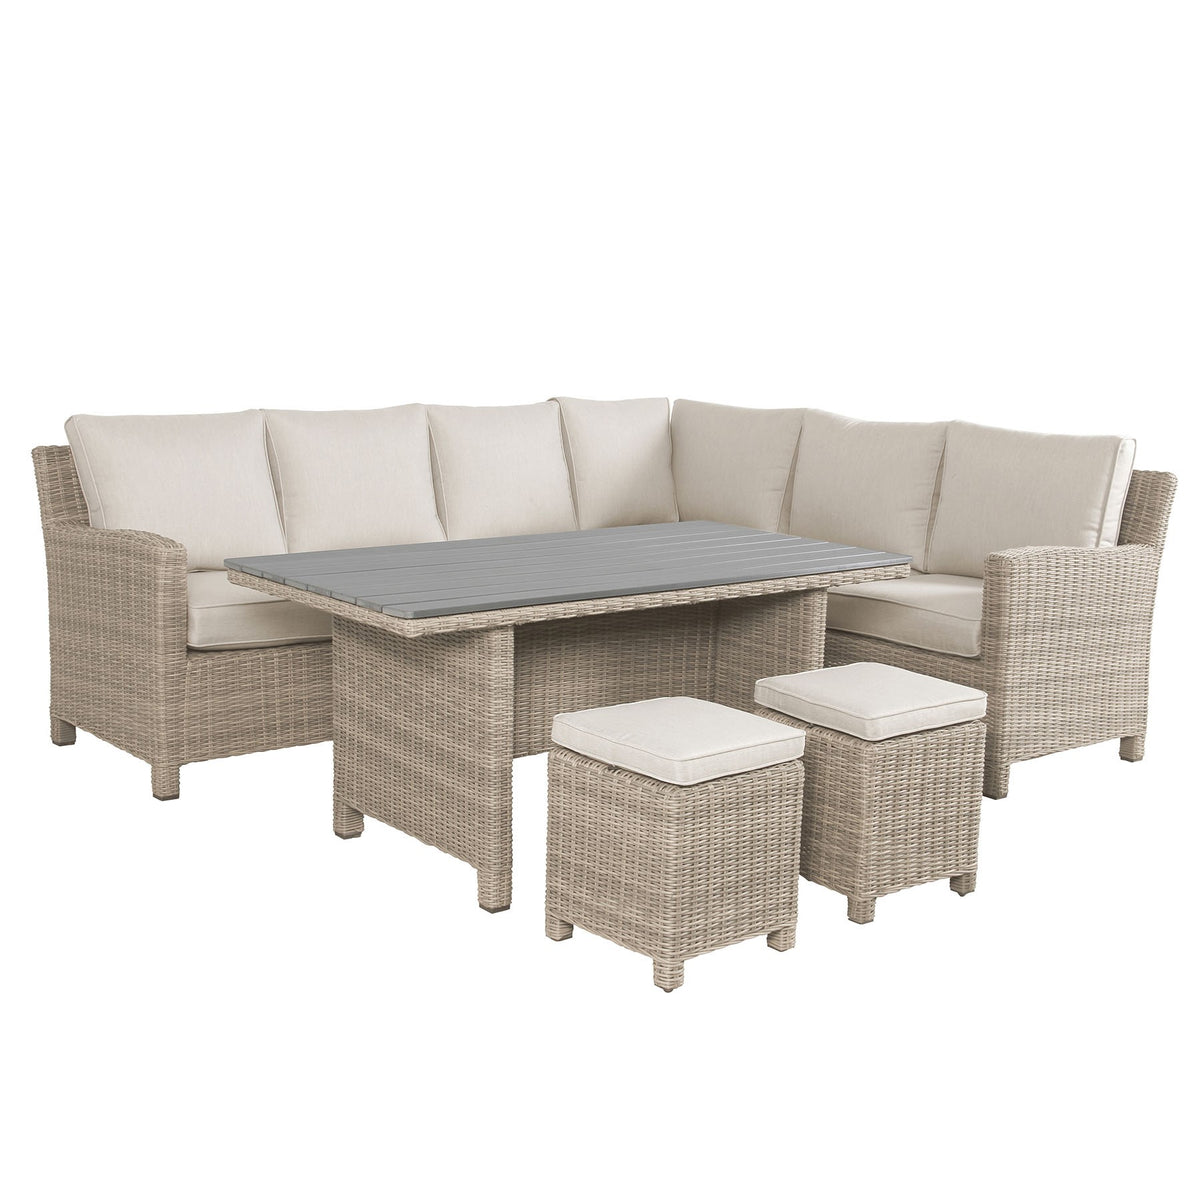 Kettler Palma Corner Left Hand Oyster Wicker Outdoor Sofa Set with Slatted Table